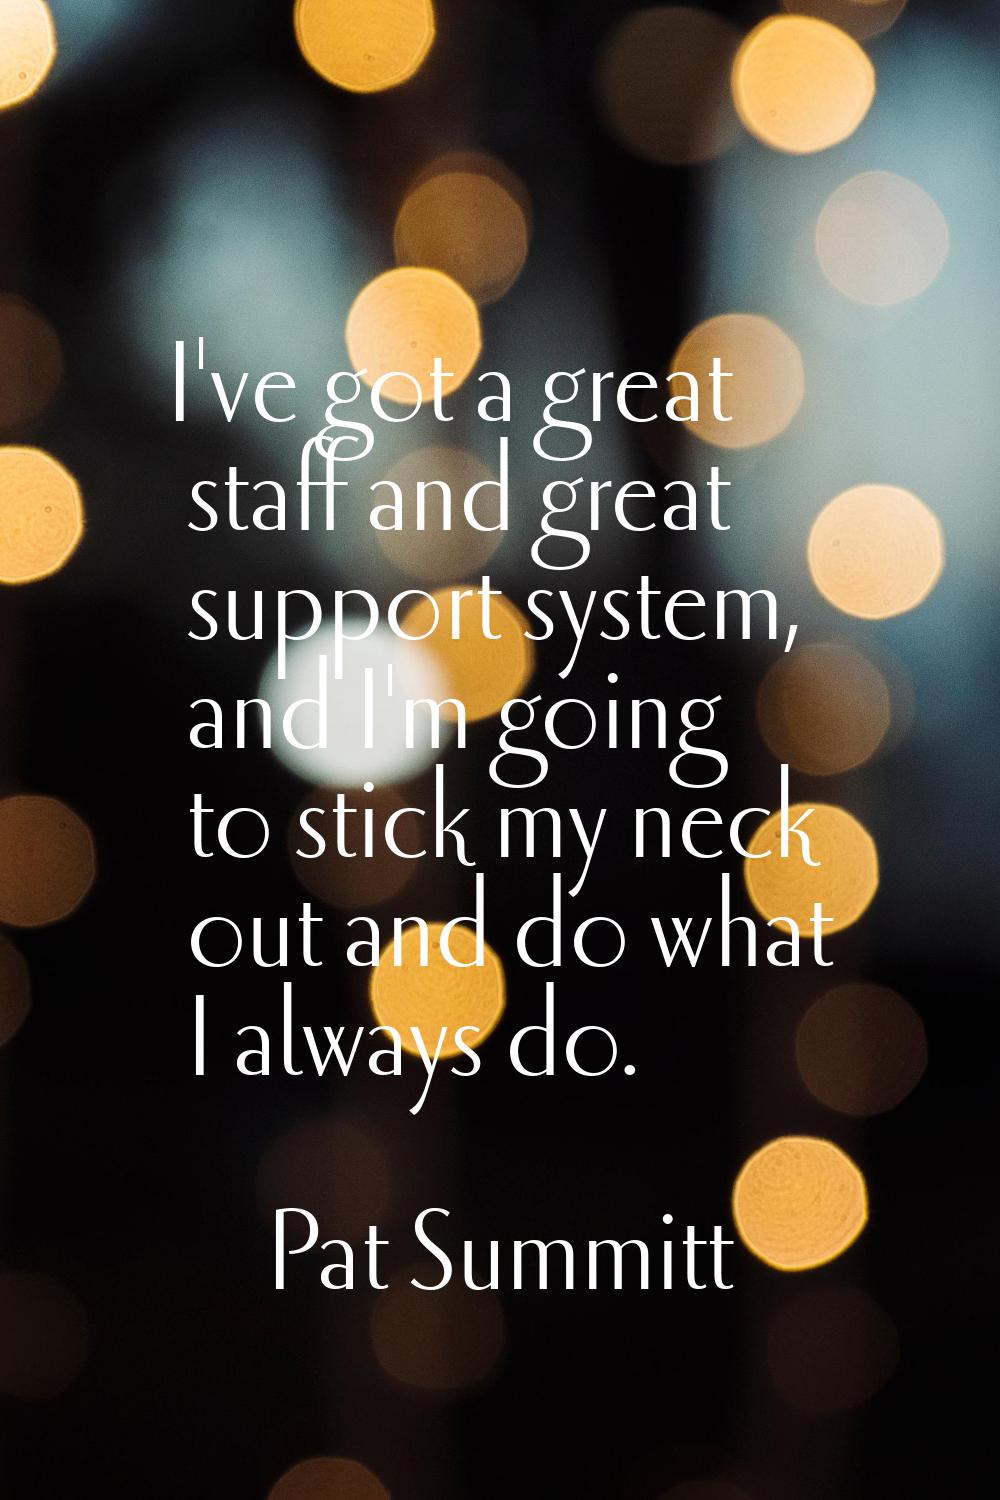 I've got a great staff and great support system, and I'm going to stick my neck out and do what I a